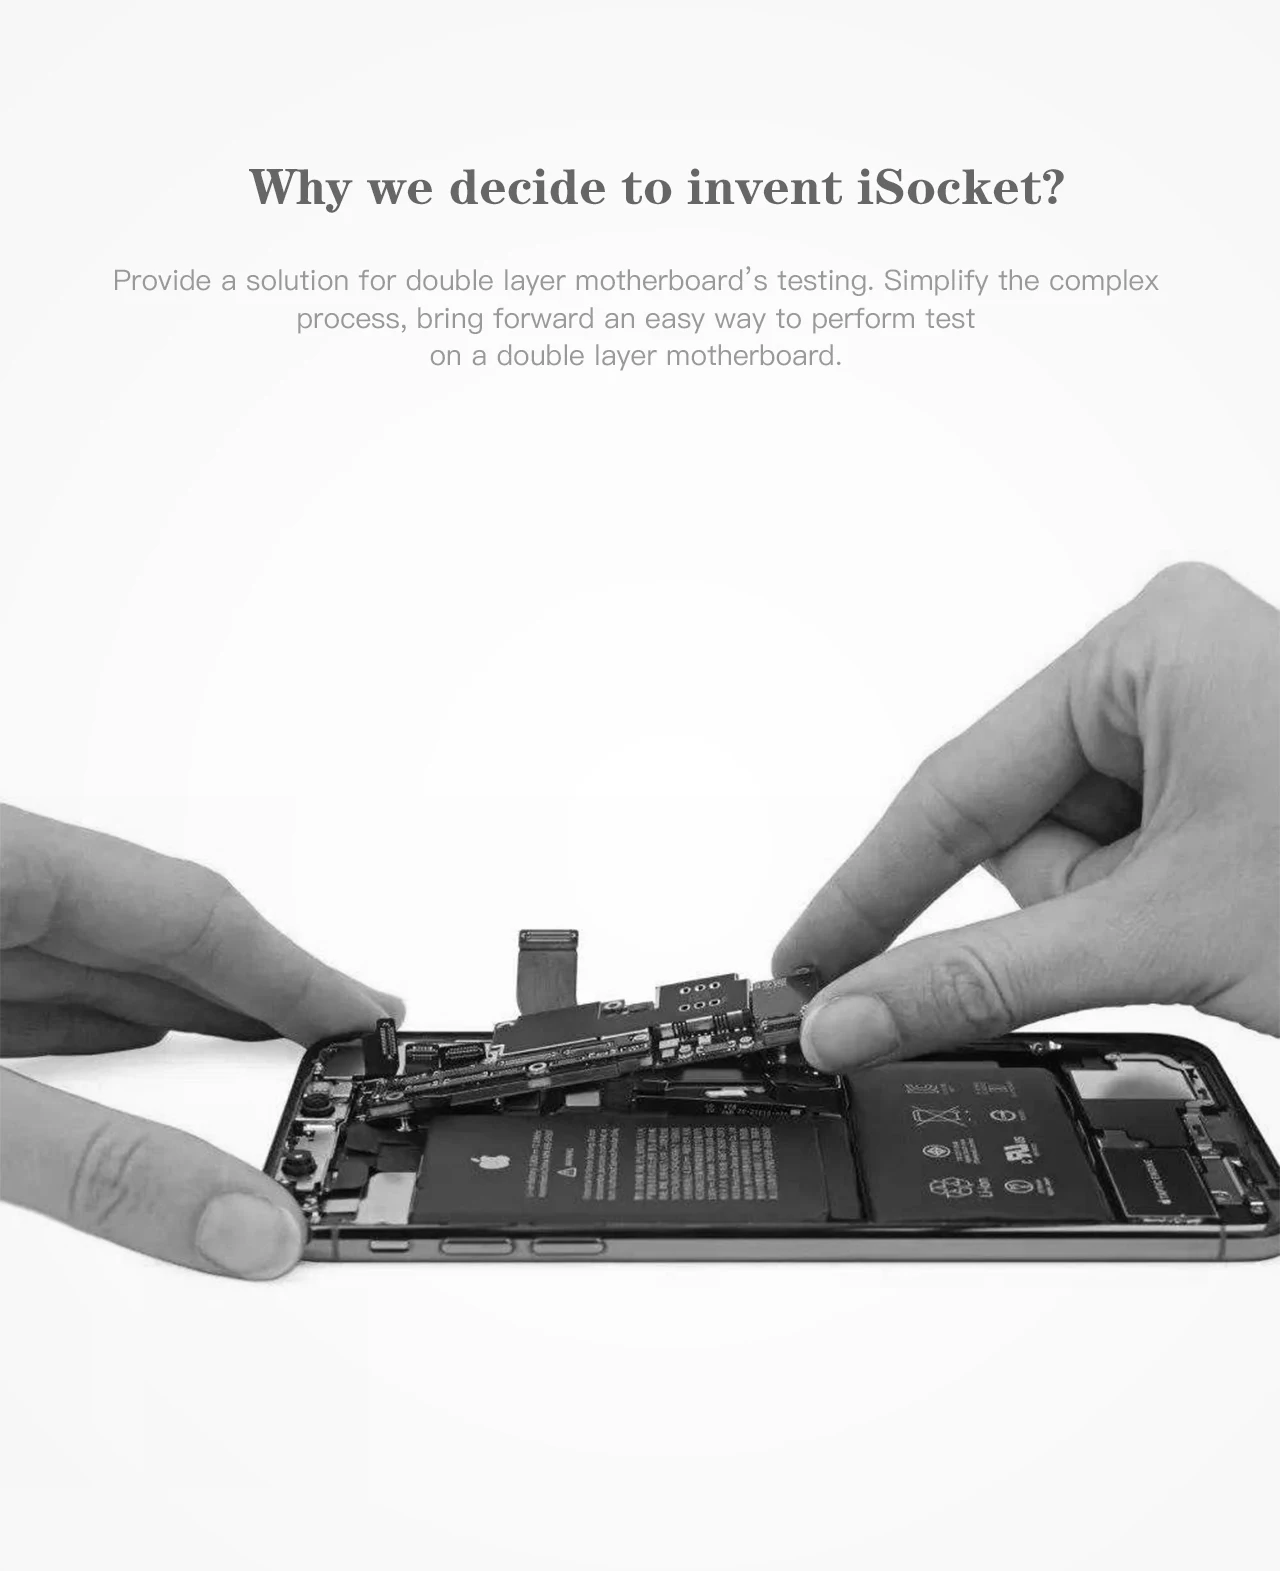 iSocket from QianLi for iPhone XS/ XS MAX  motherboard test and repair